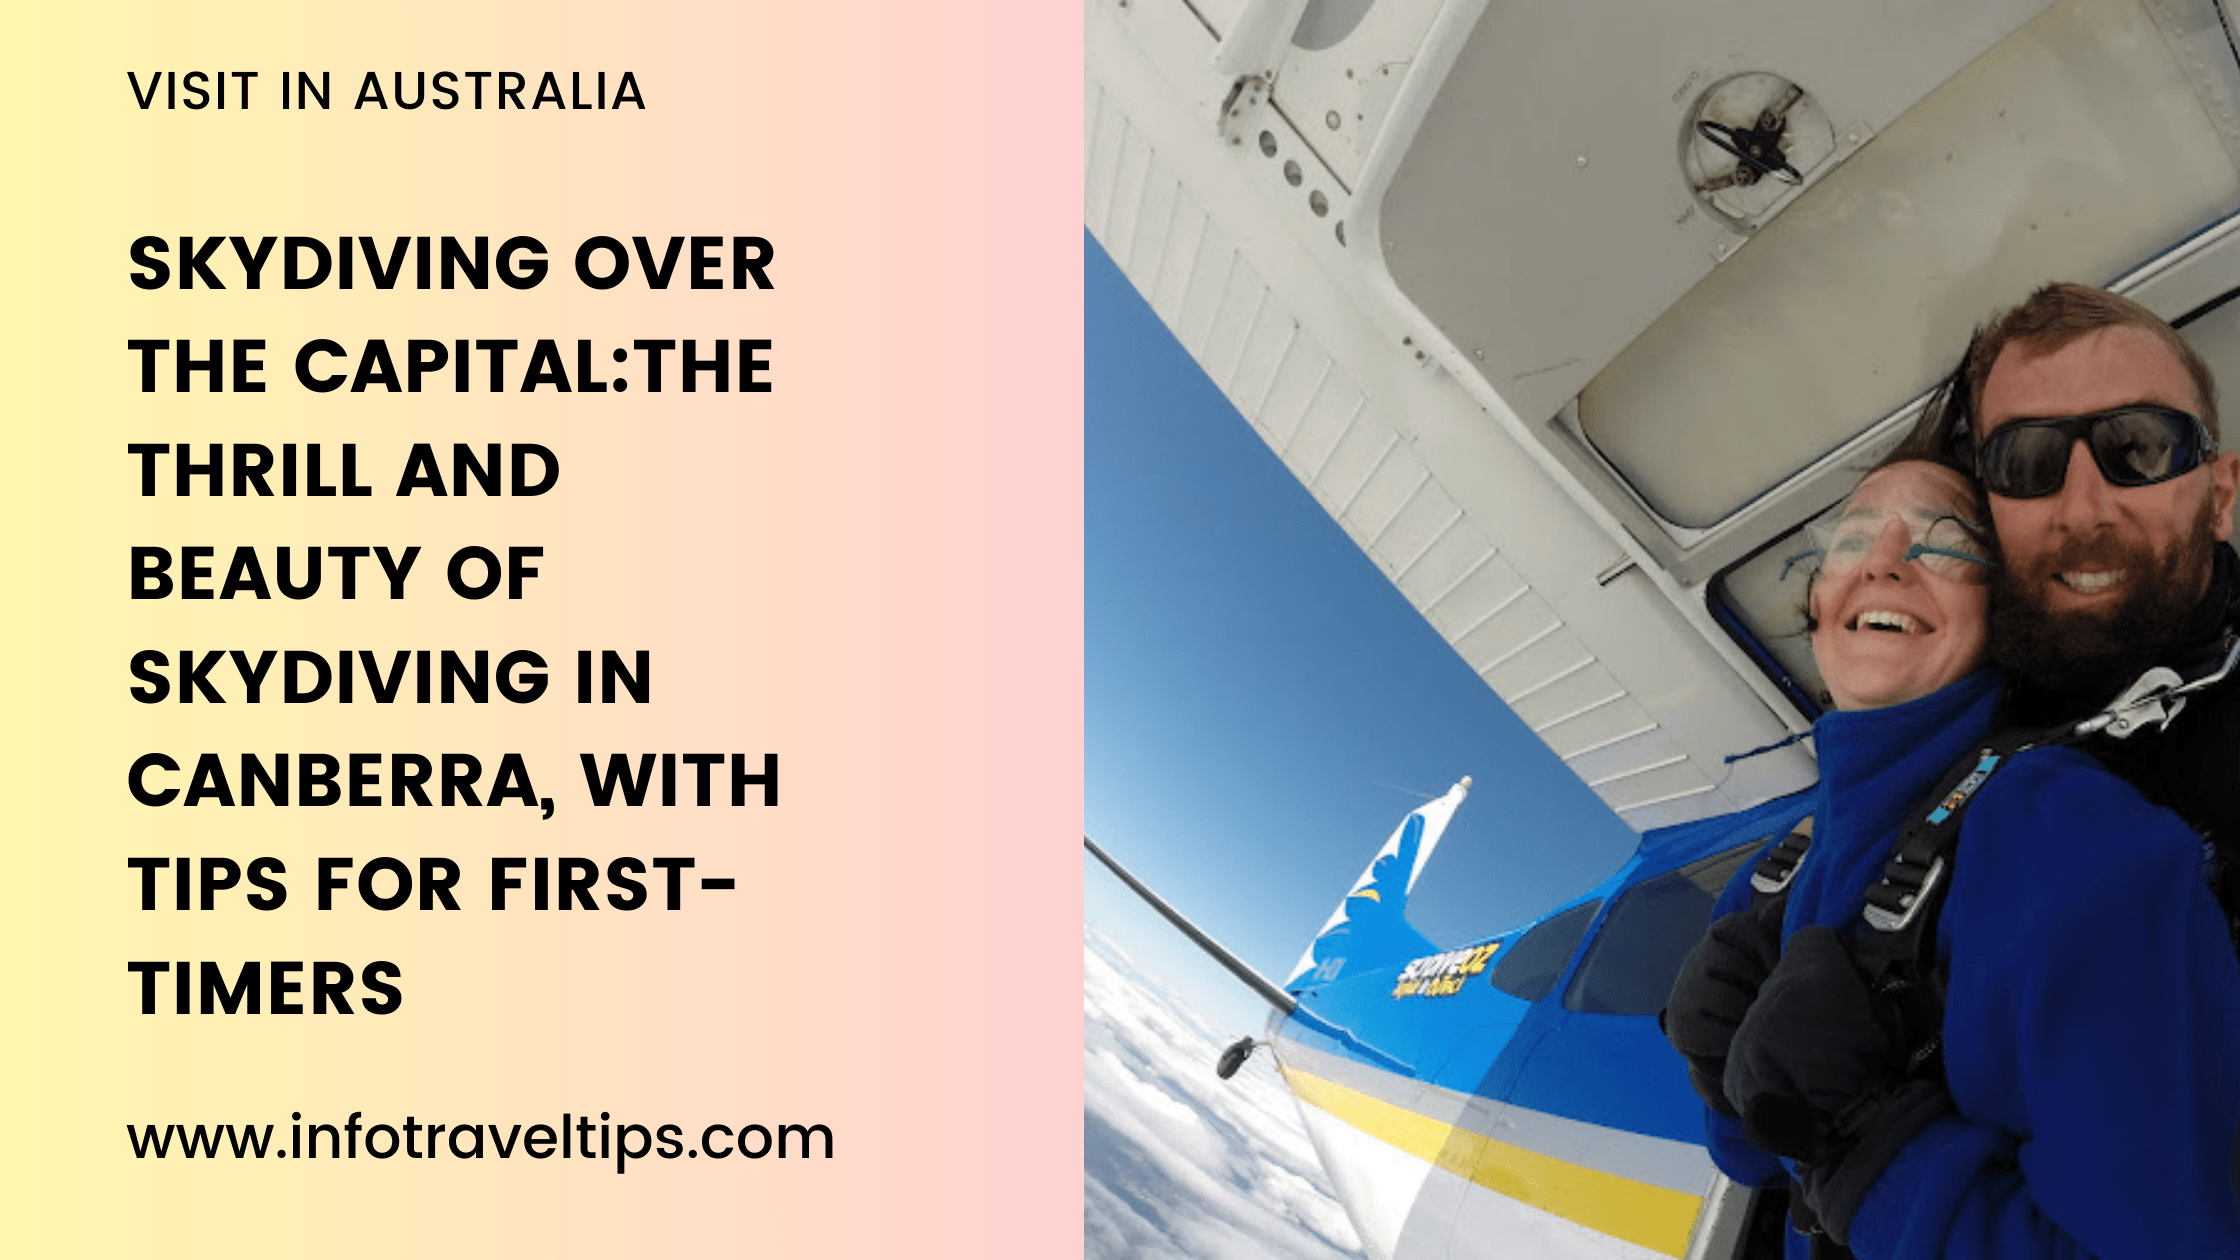 Skydiving Over the Capital: The Thrill and Beauty of Skydiving in Canberra, with Tips for First-Timers